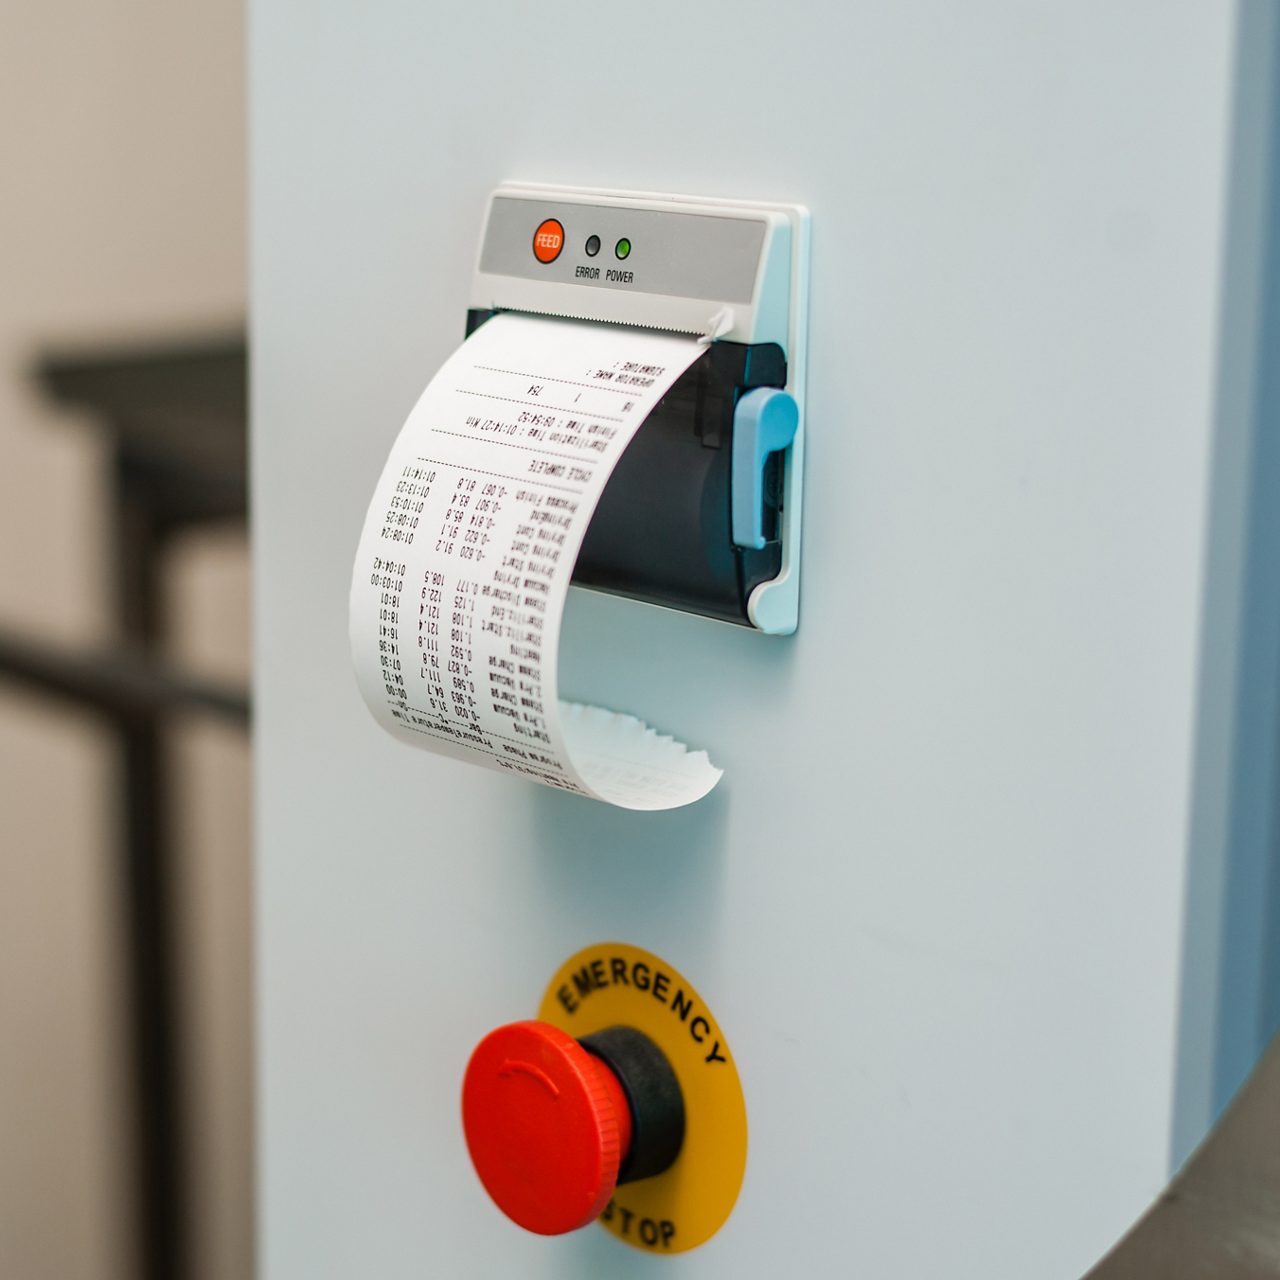 Machine printing a receipt on thermal paper 